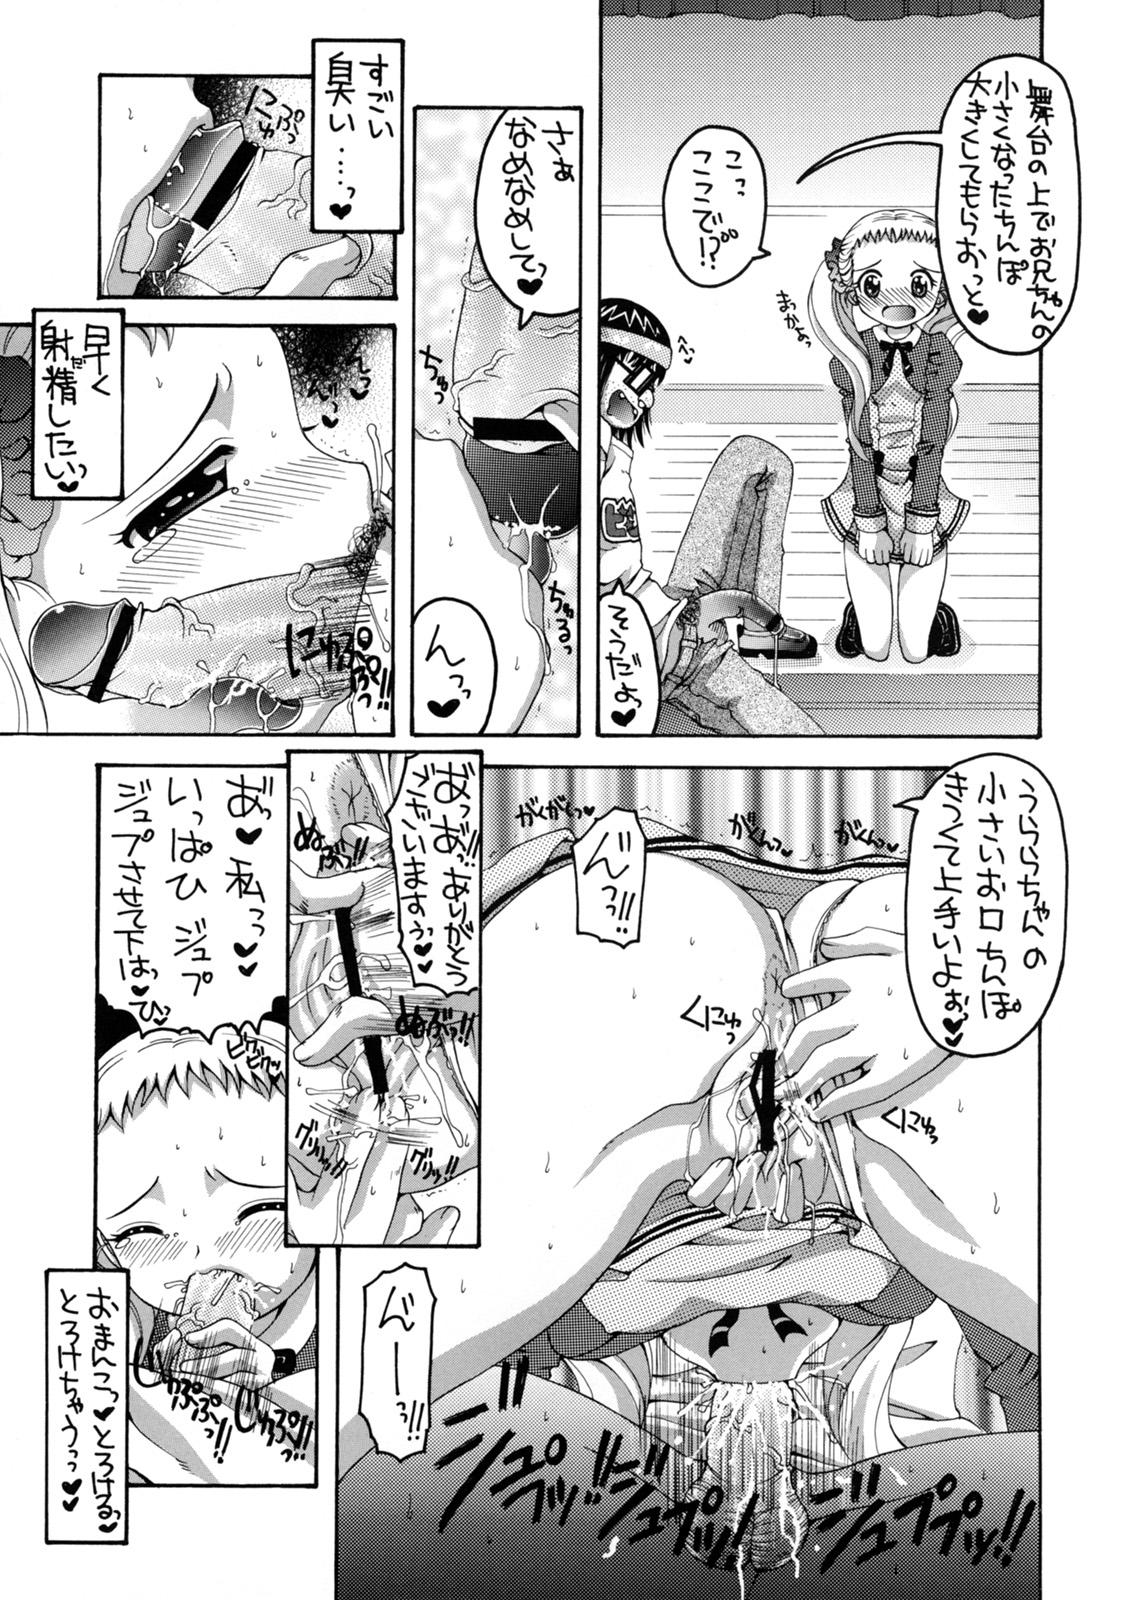 Analsex Yes! Five 3 - Pretty cure Yes precure 5 Czech - Page 6